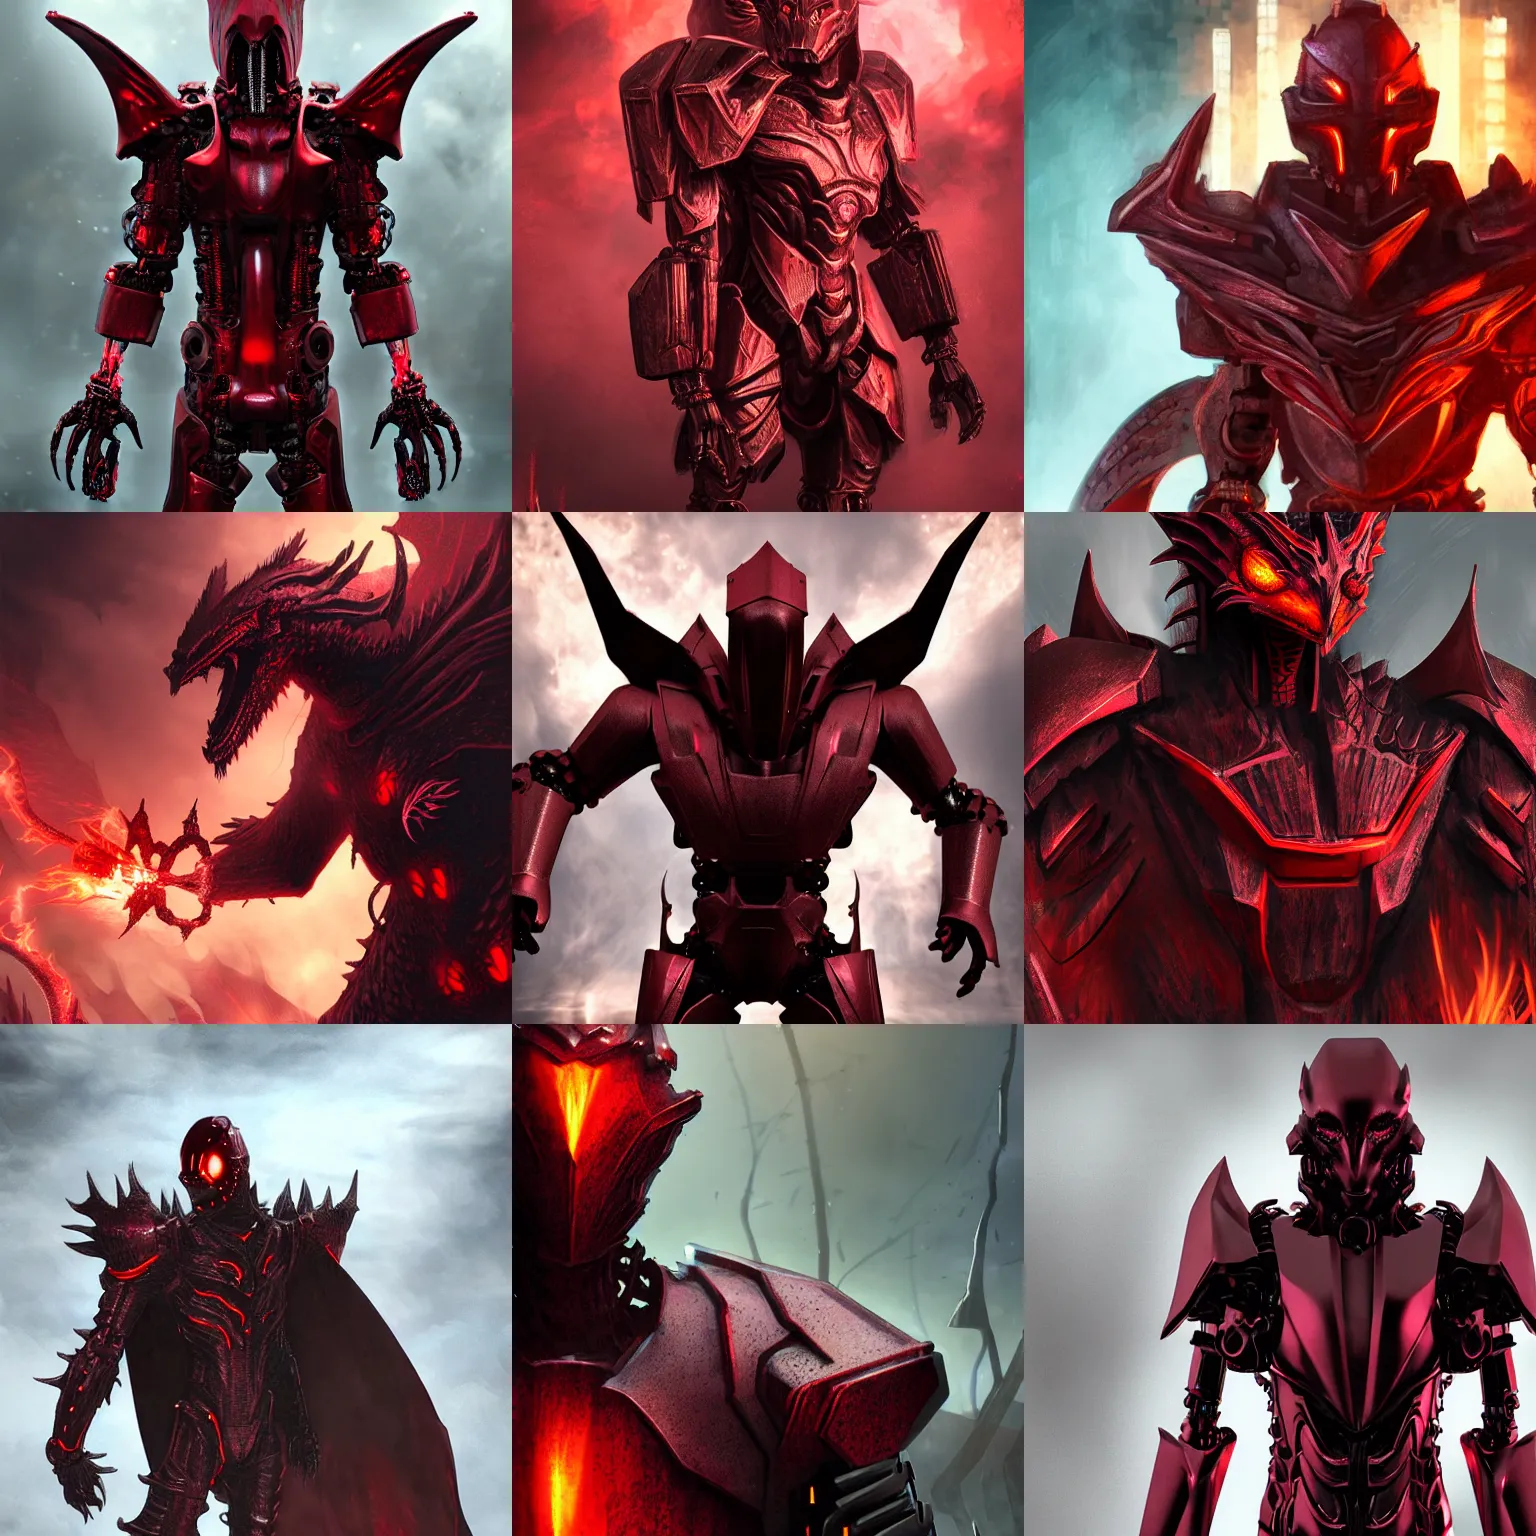 Prompt: ominous cybernetic humanoid figure with dark red matte metallic thick block armor plates as skin, dragon head, epic fantasy artwork, evil, gritty, matte, burning scene in the background